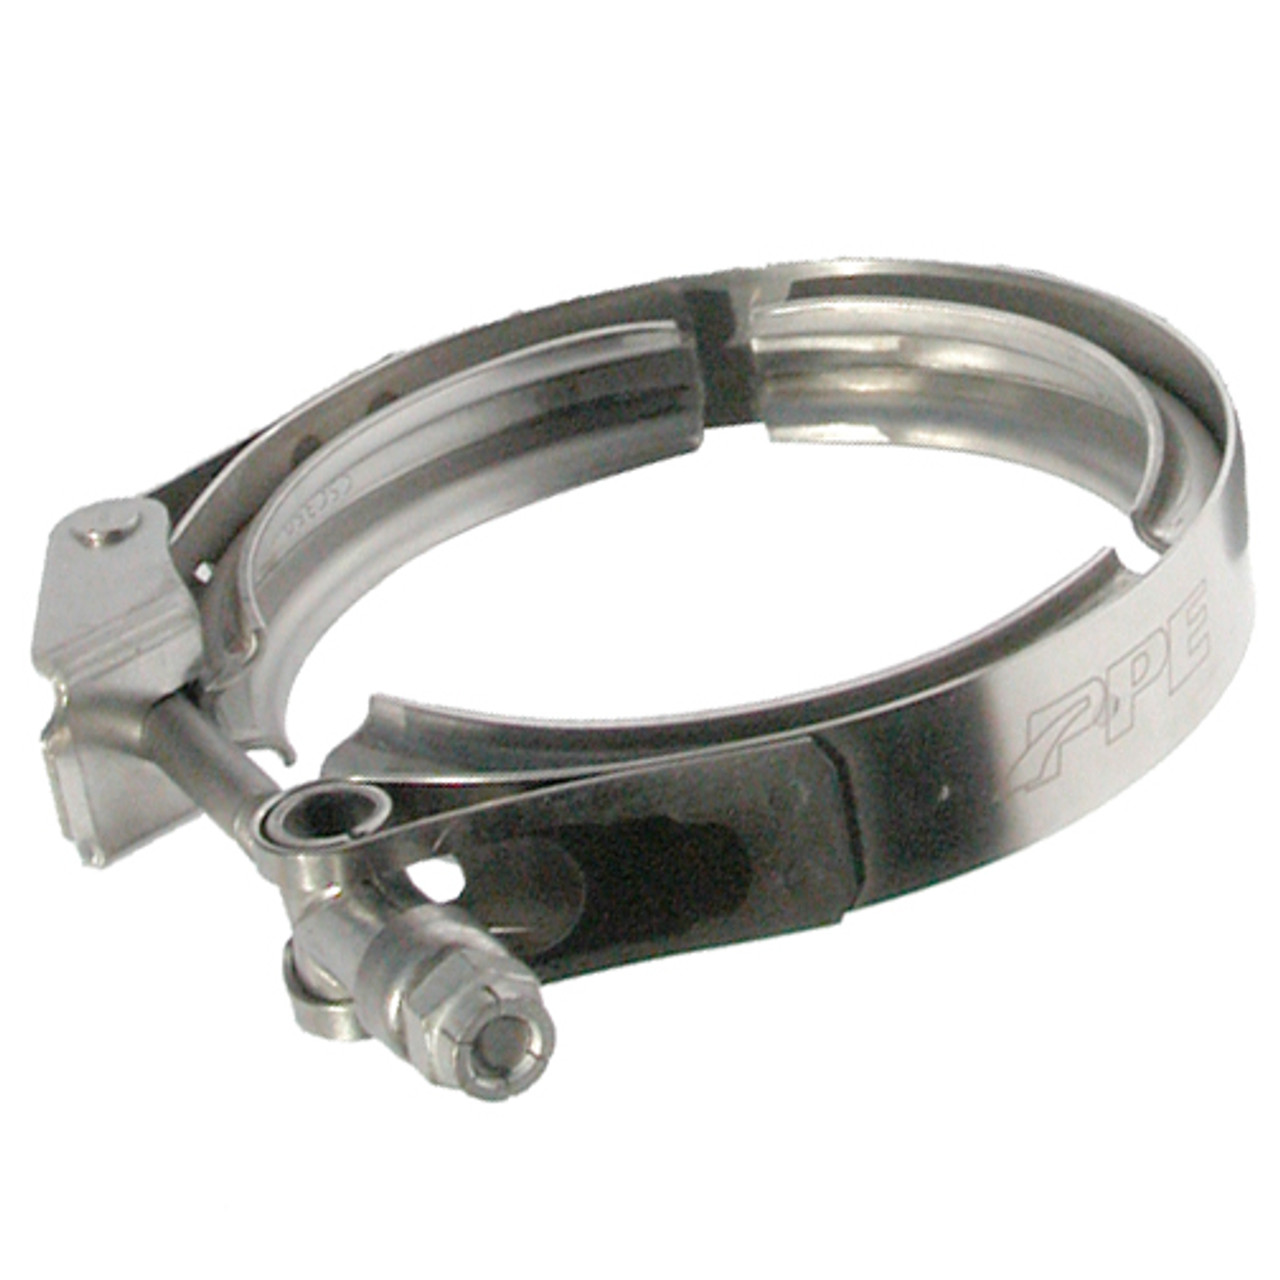 PPE 517140000 4" QUICK RELEASE 304 STAINLESS STEEL V-BAND CLAMP